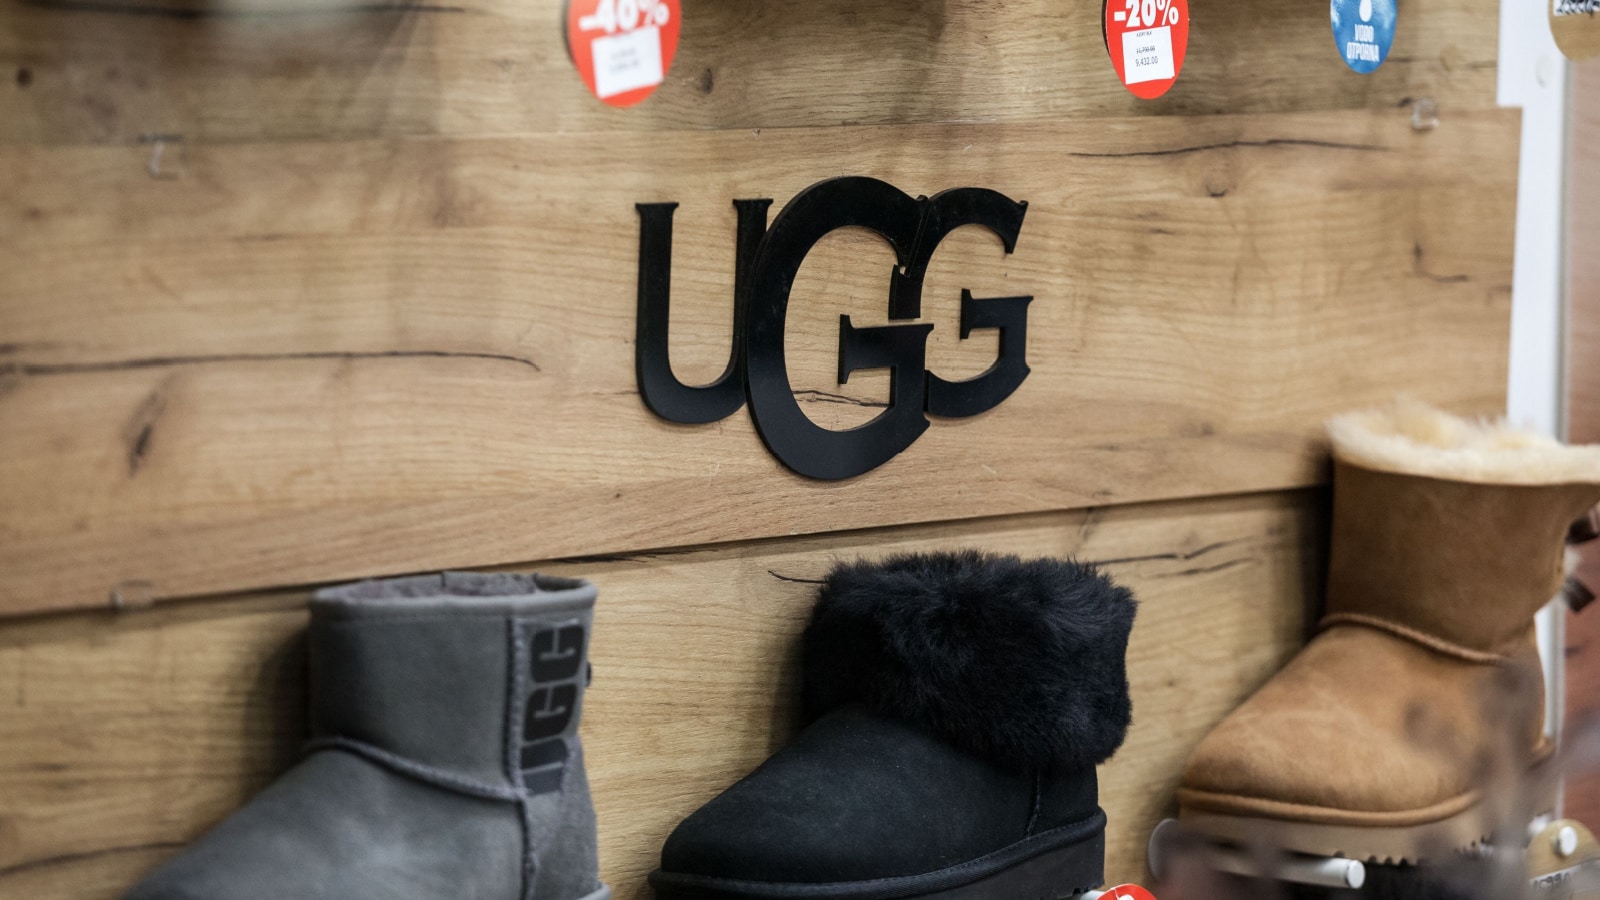 BELGRADE, SERBIA - DECEMBER 8 2020: Ugg logo in front of some of their boots for sale in a shop. Ugg is an american footwear brand known for their sheepsking boots.